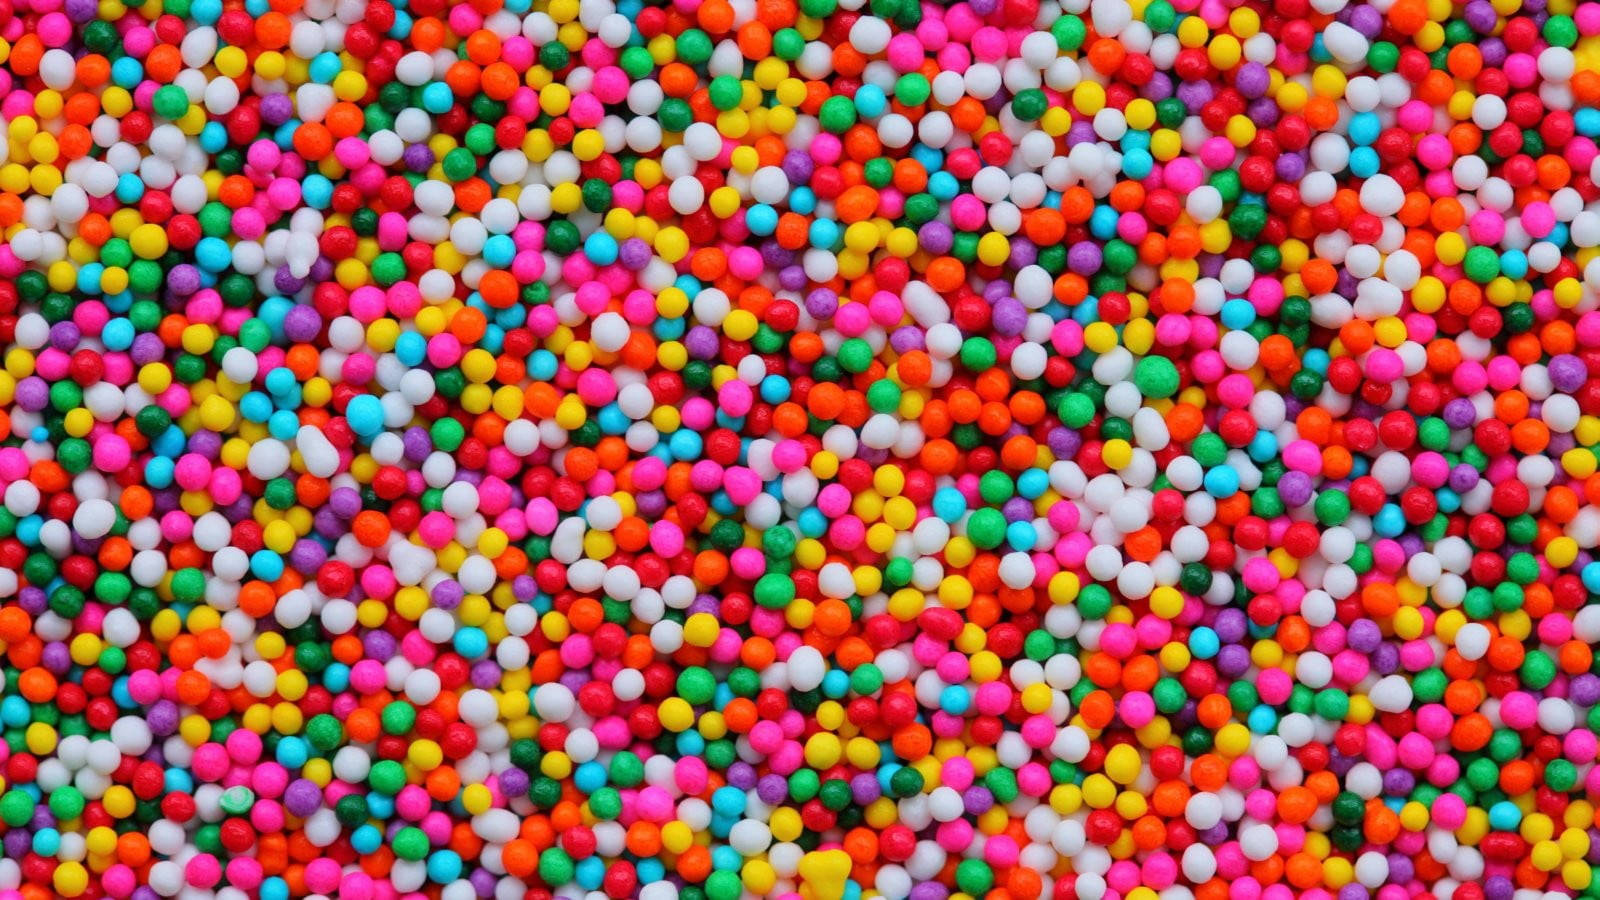 Colorful Candy Balls Wallpaper